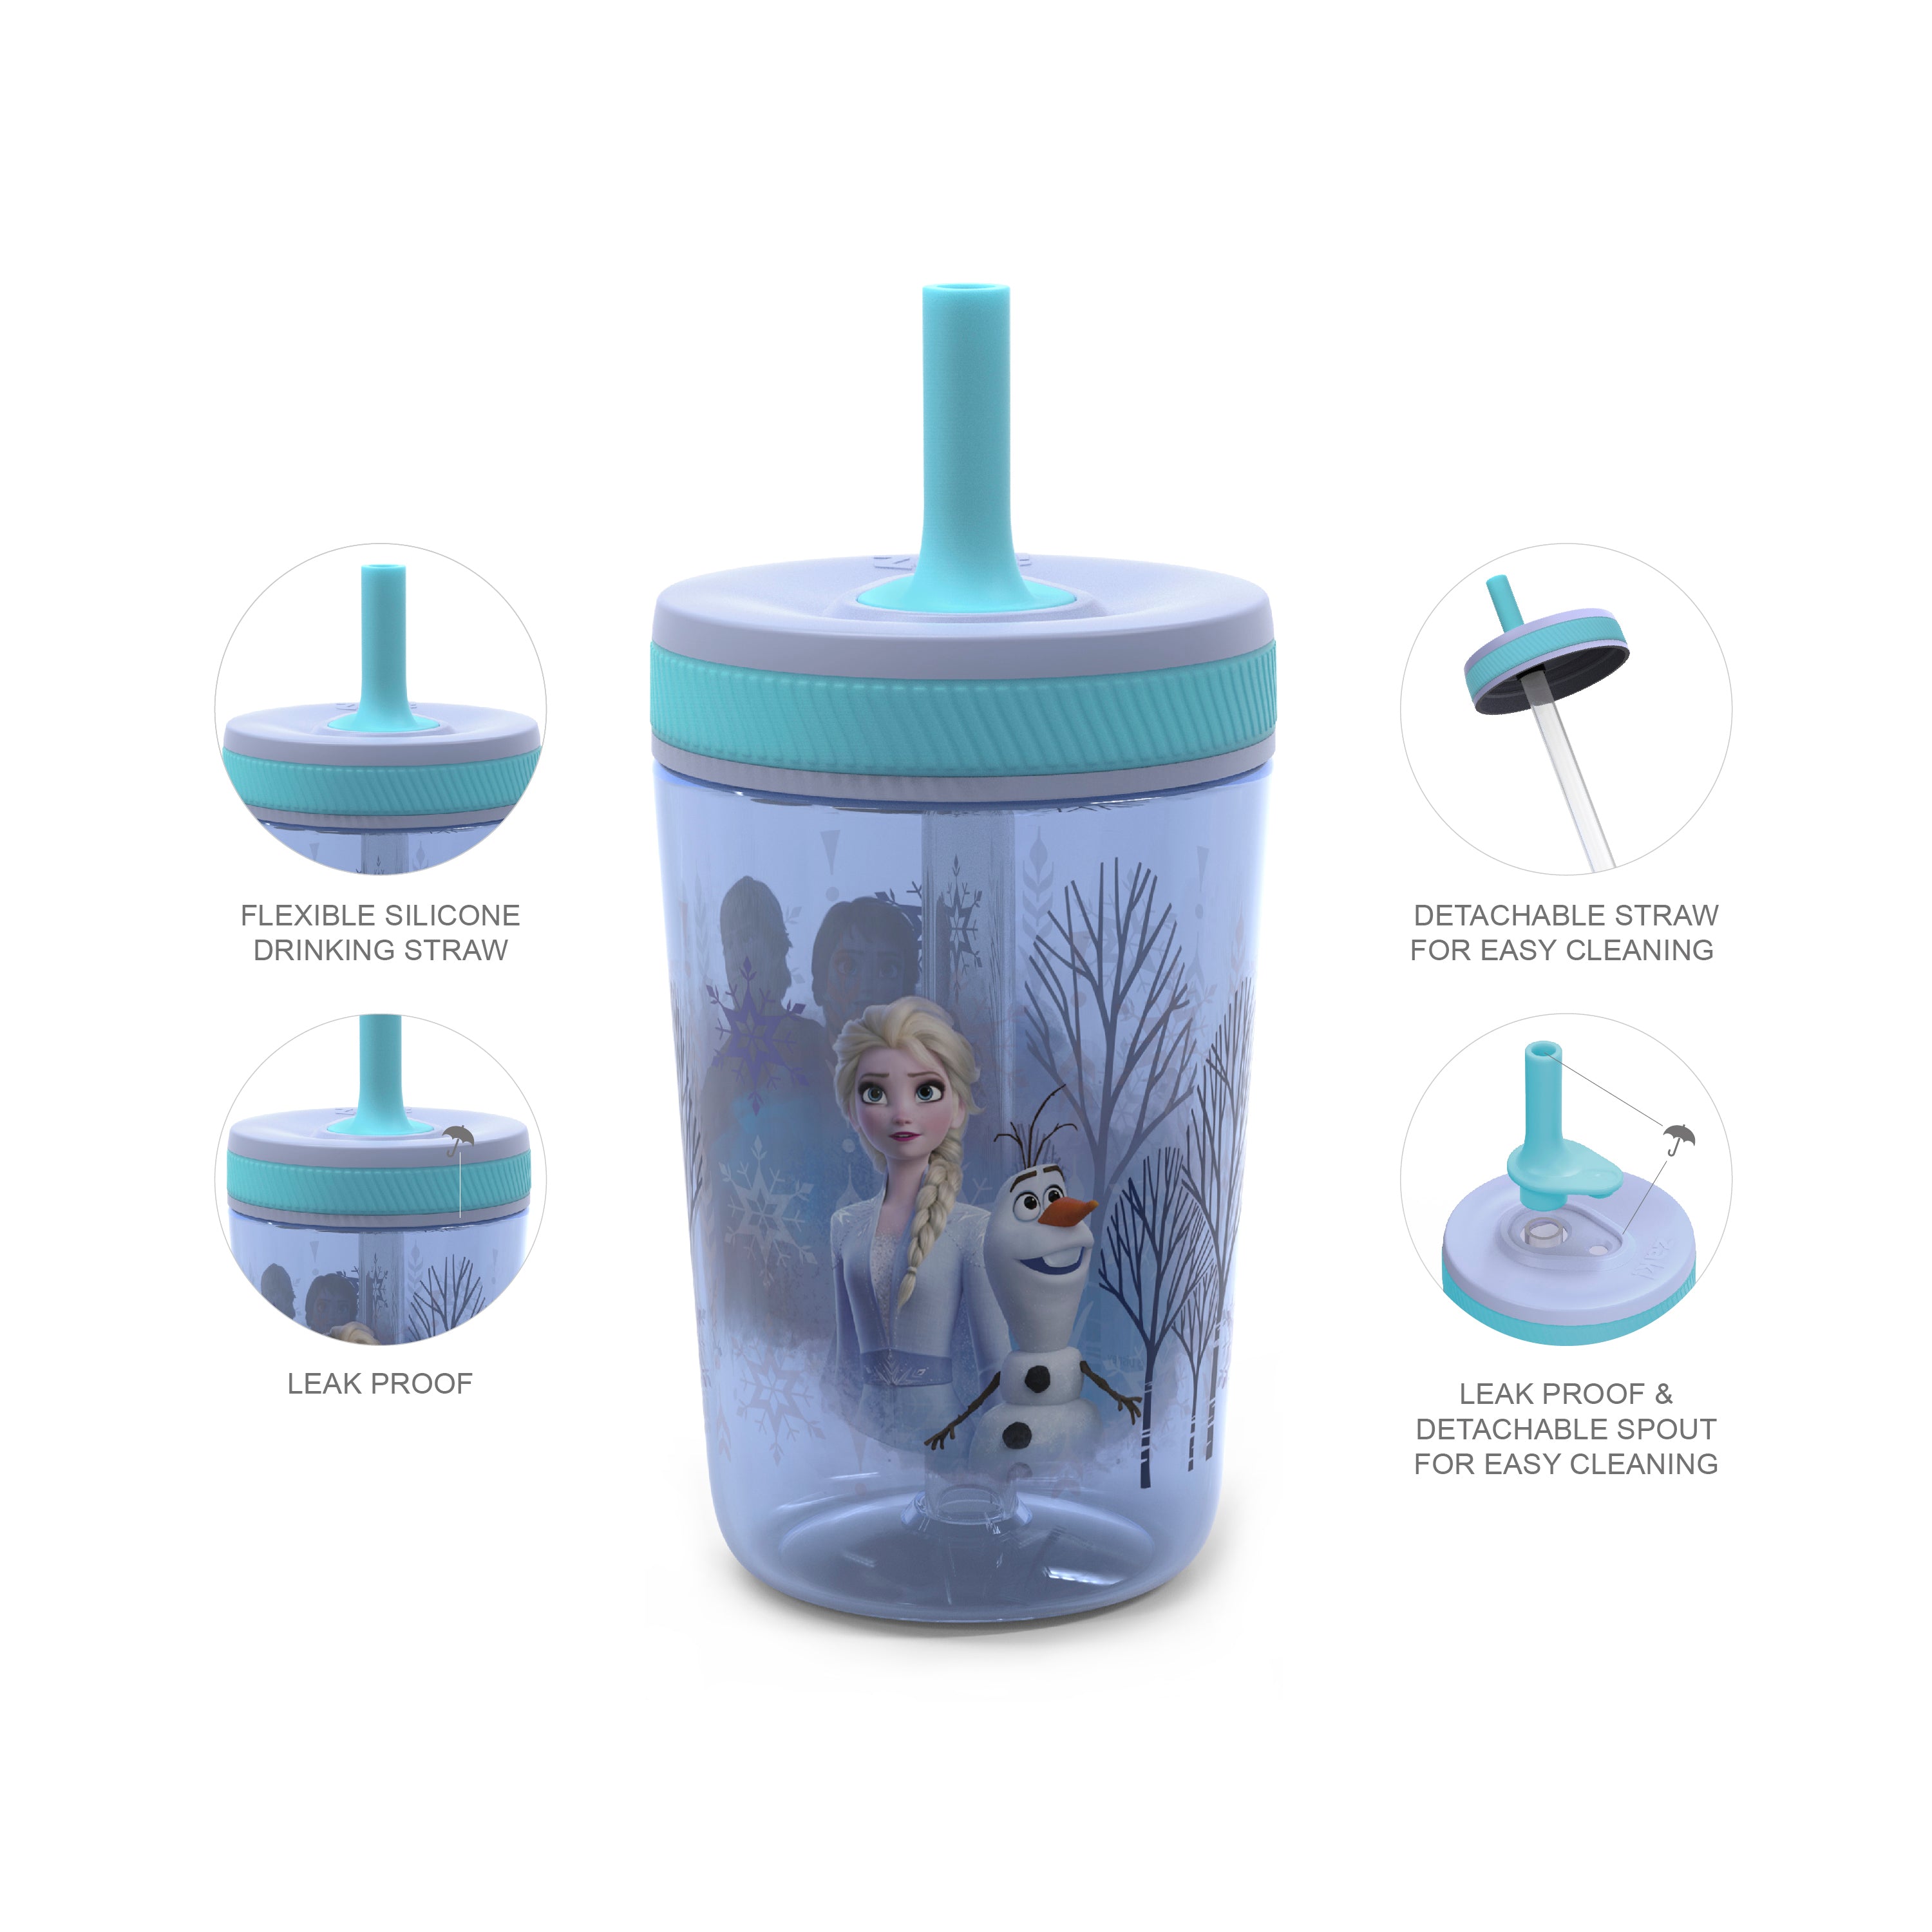 Zak Designs Disney Kelso Tumbler 15 oz Set (Minnie Mouse) Leak-Proof Screw-On Lid with Straw, Made of Durable Plastic and Silicone, Perfect Bundle